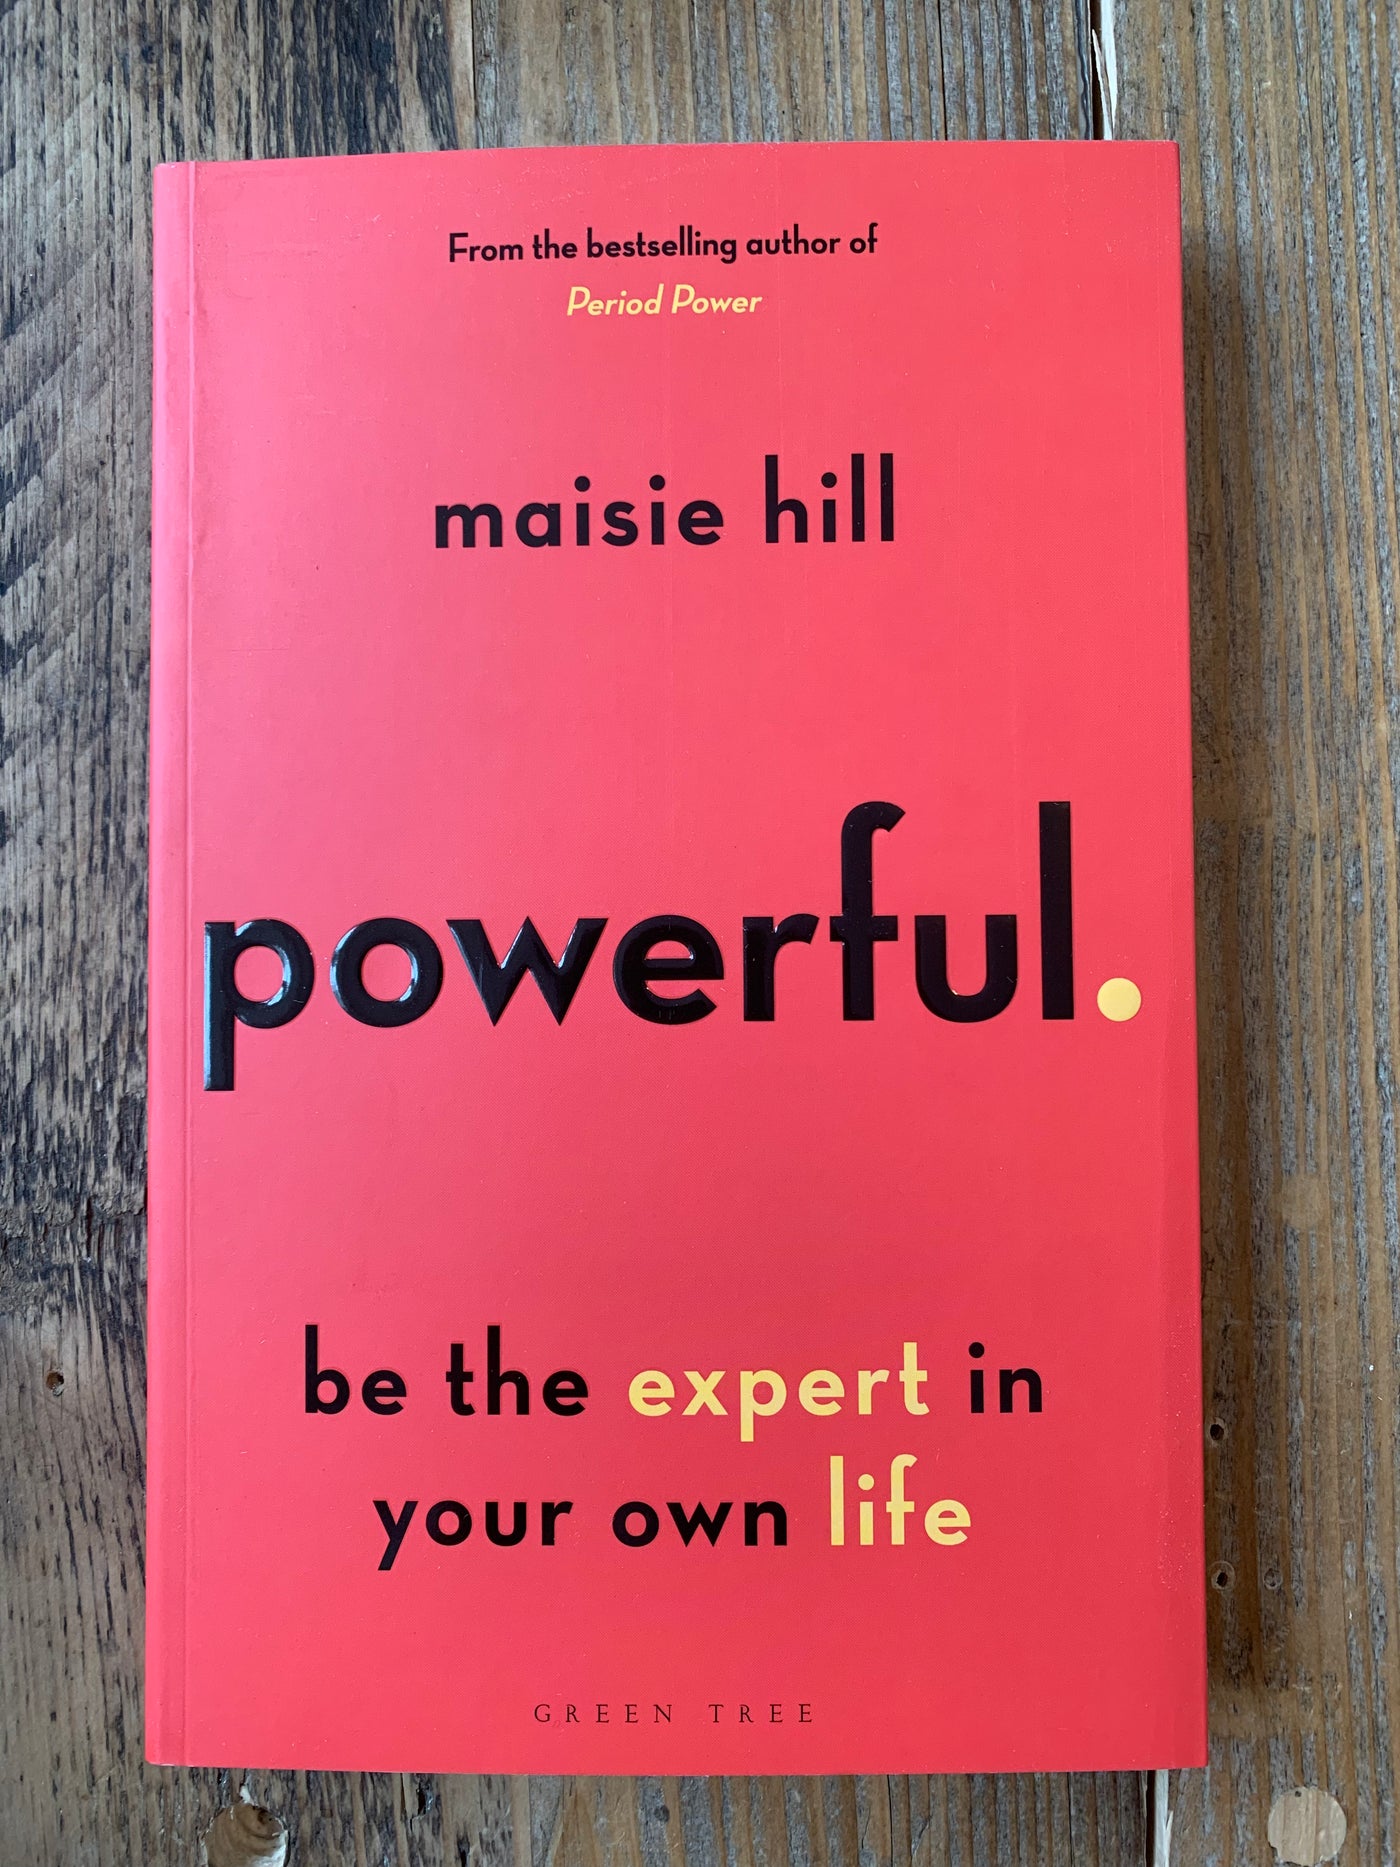 Powerful: Be the Expert in Your Own Life